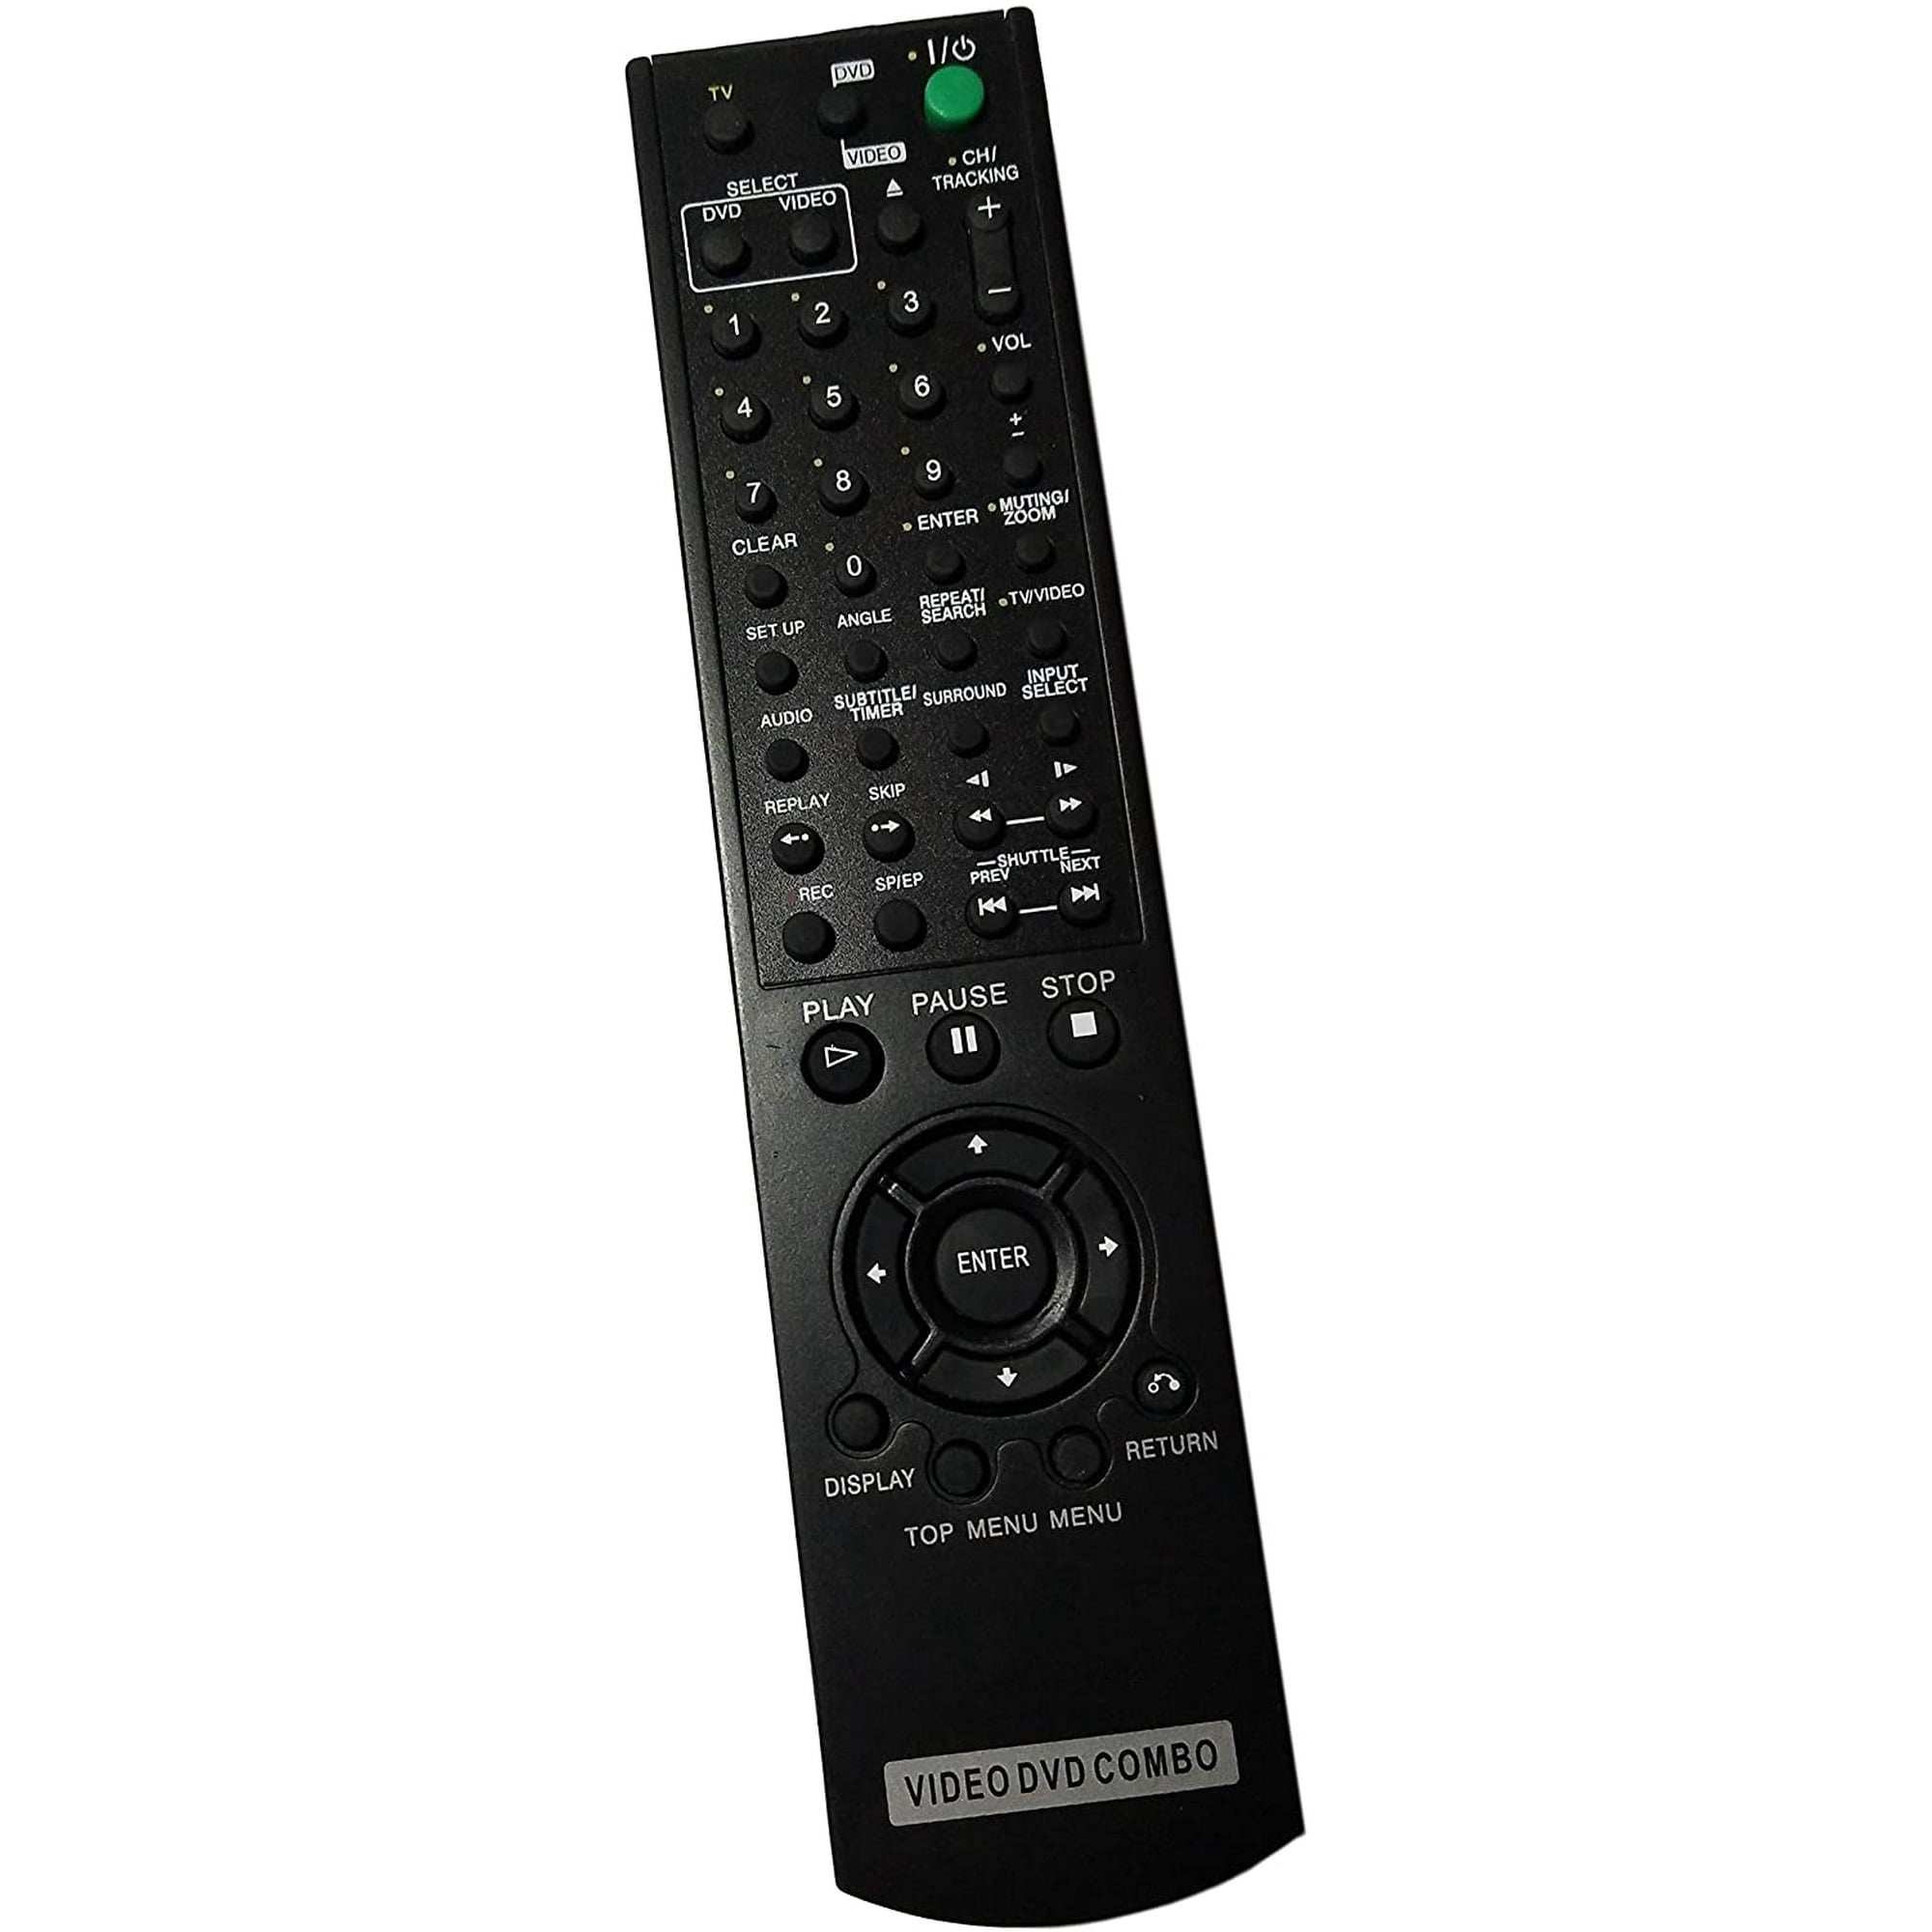 Replaced Remote Control Compatible for Sony SLV-D281 SLVD300P SLV-D201P  SLVD370P HTV3000DP YSP4000BL SLVD350P TV DVD VCR Combo Player | Walmart  Canada